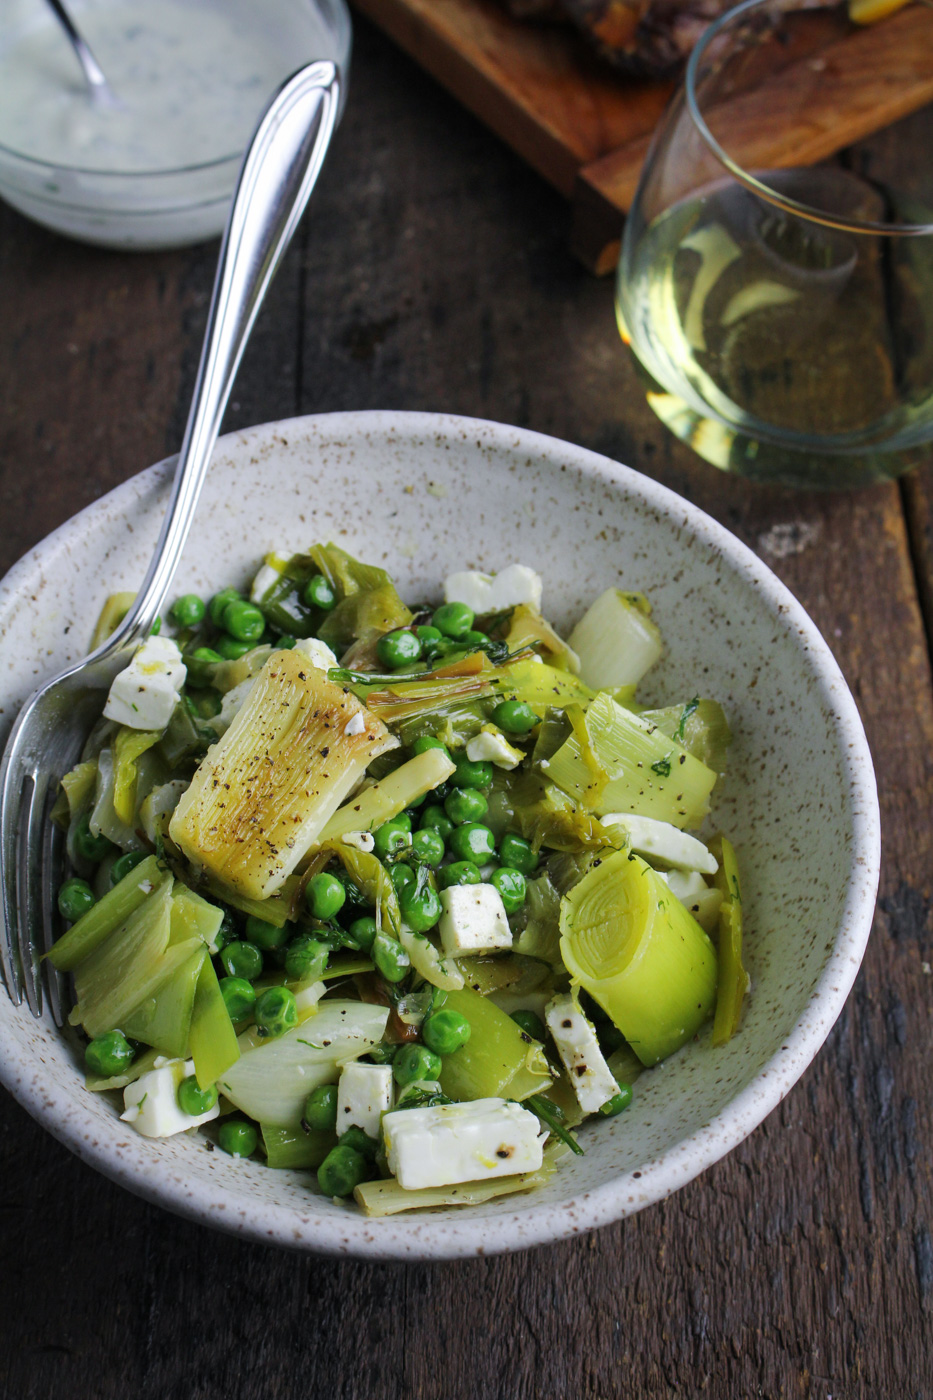 Olive-Oil Braised Leeks and Peas with Feta and Dill - Sunday Dinner: Easter Edition {Katie at the Kitchen Door}